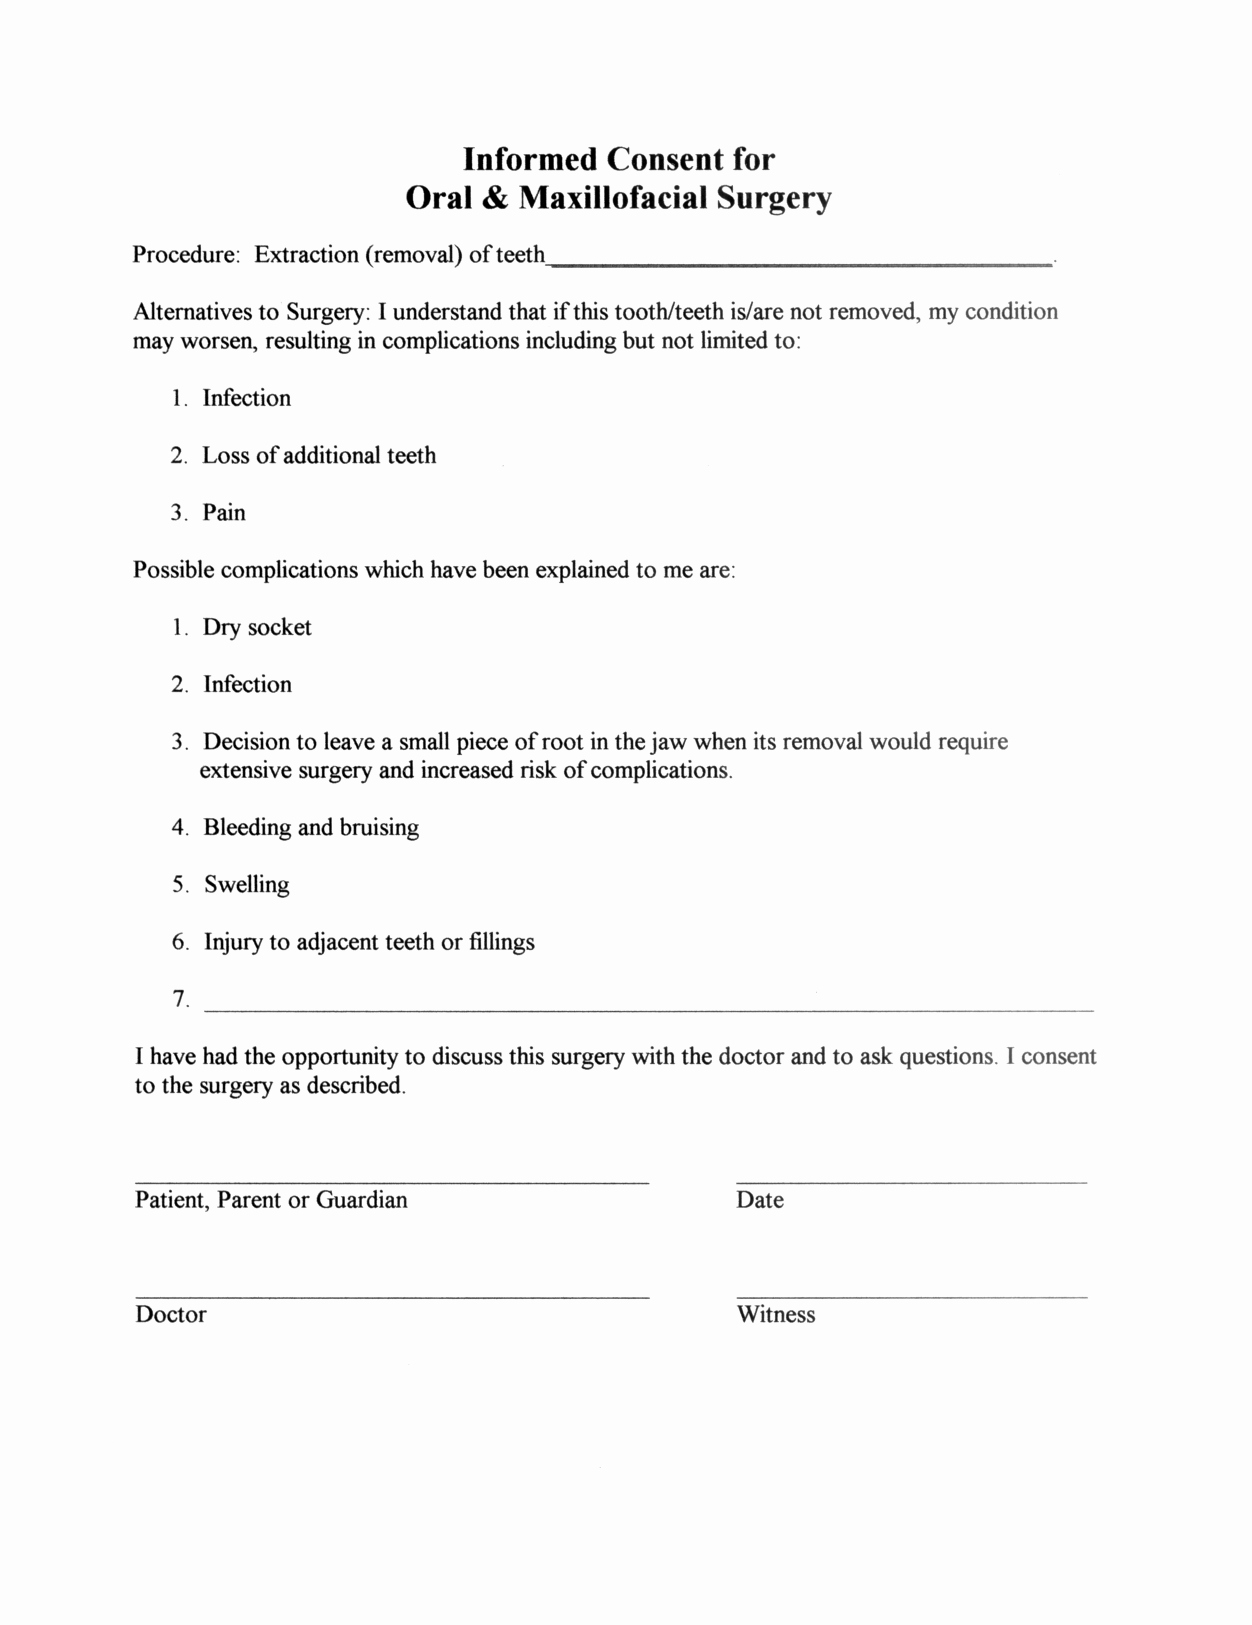 Medical Consent form Template Lovely Surgery Informed Consent form Template